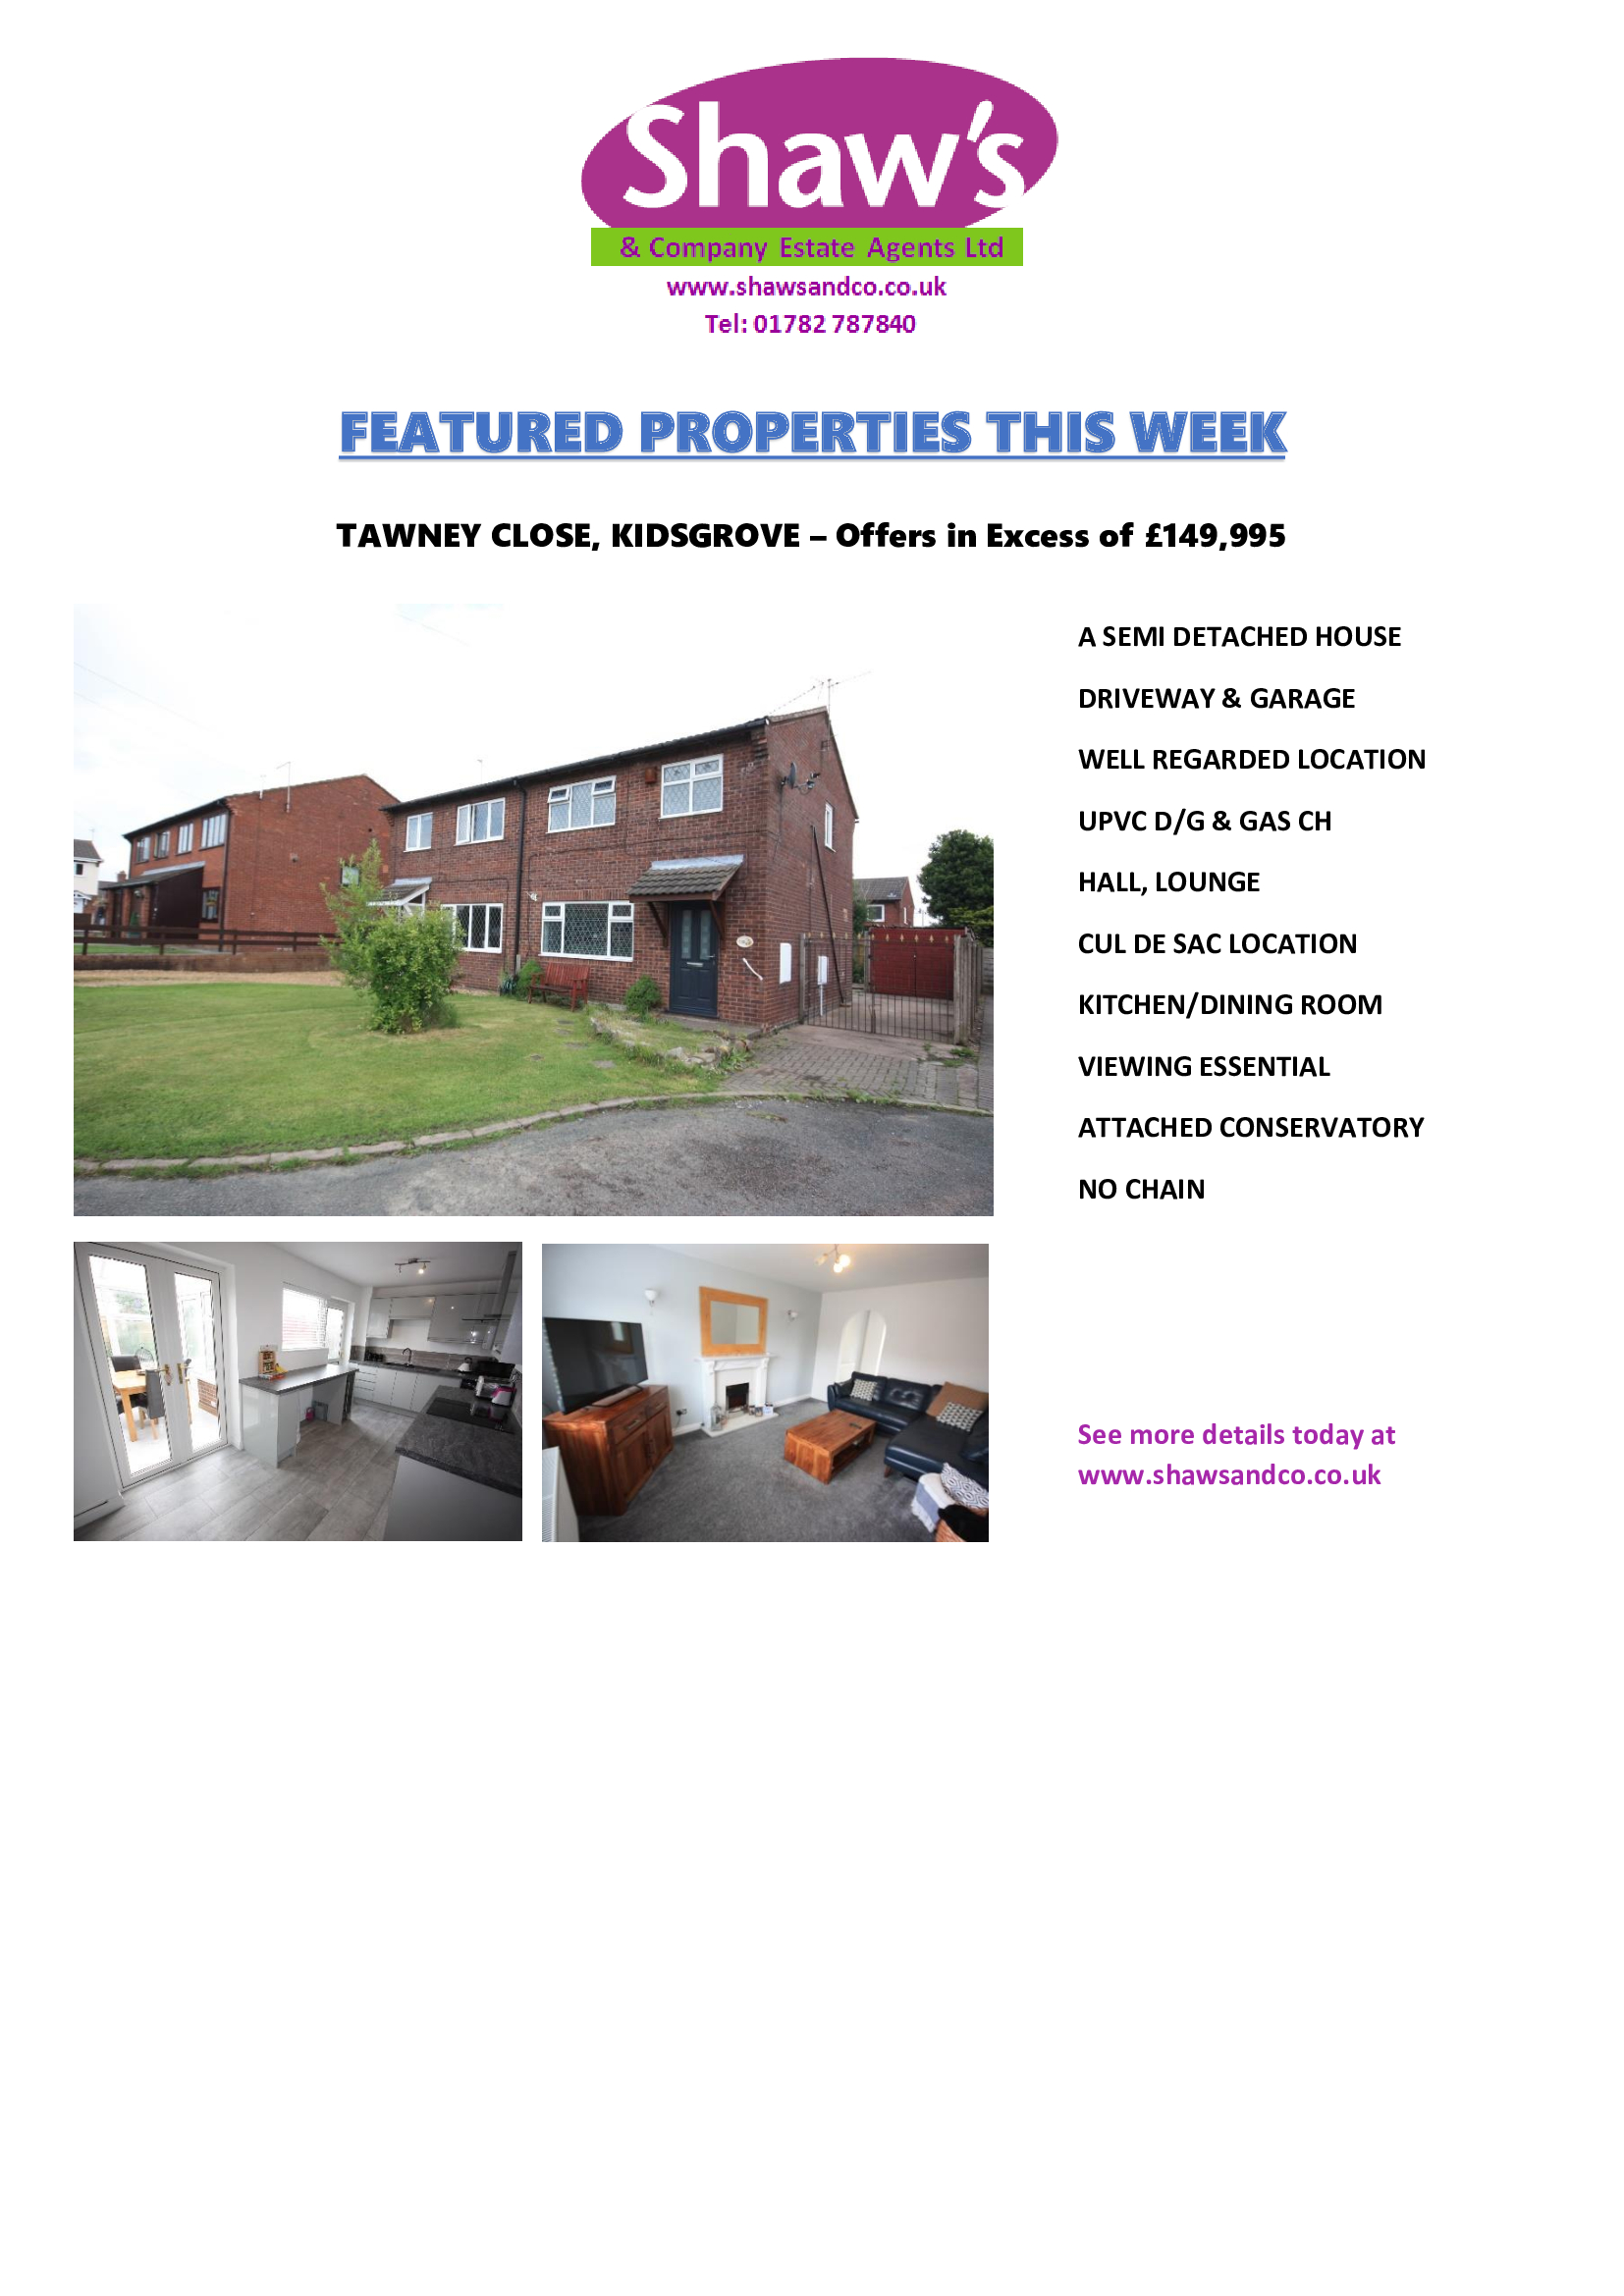 FEATURED PROPERTIES OF THE WEEK - DOUBLE EDITION!